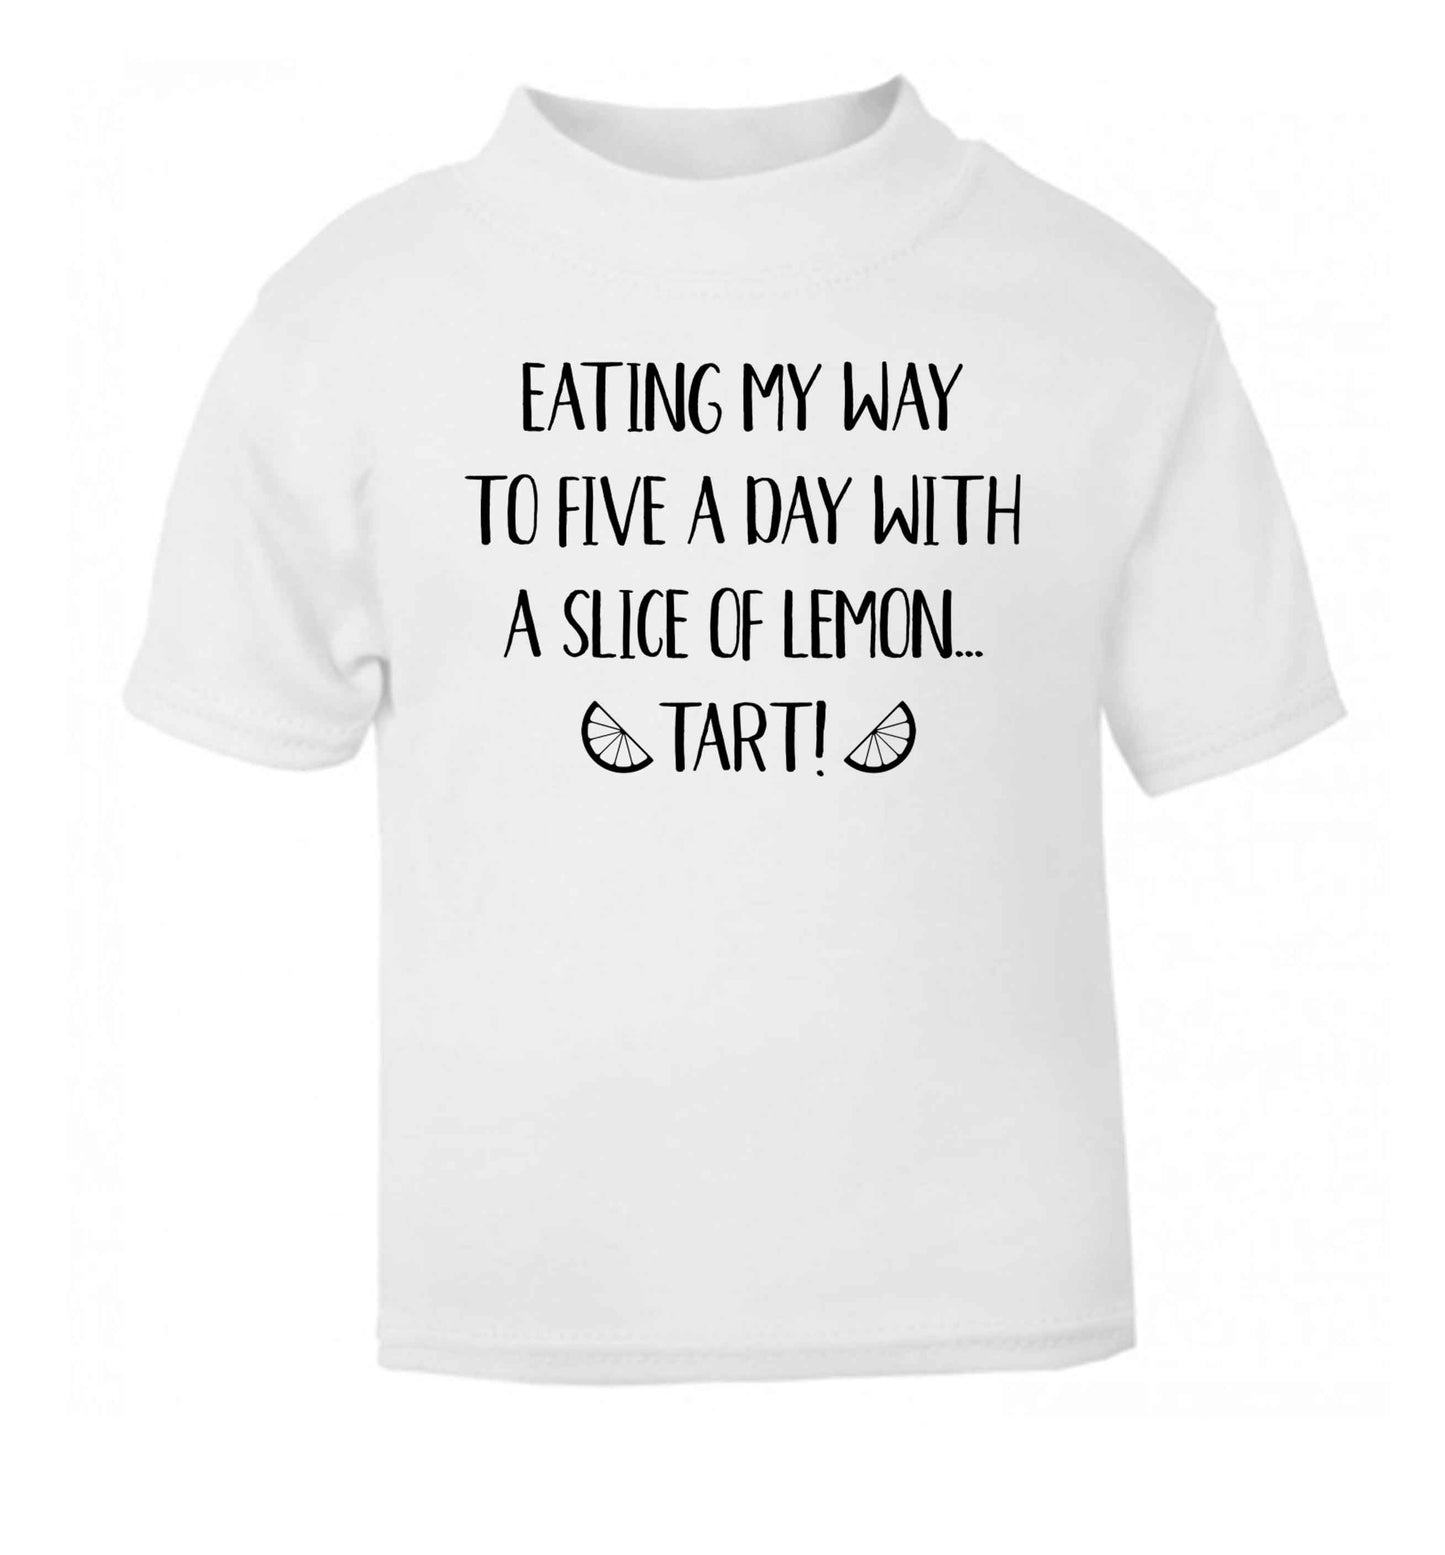 Eating my way to five a day with a slice of lemon tart white Baby Toddler Tshirt 2 Years